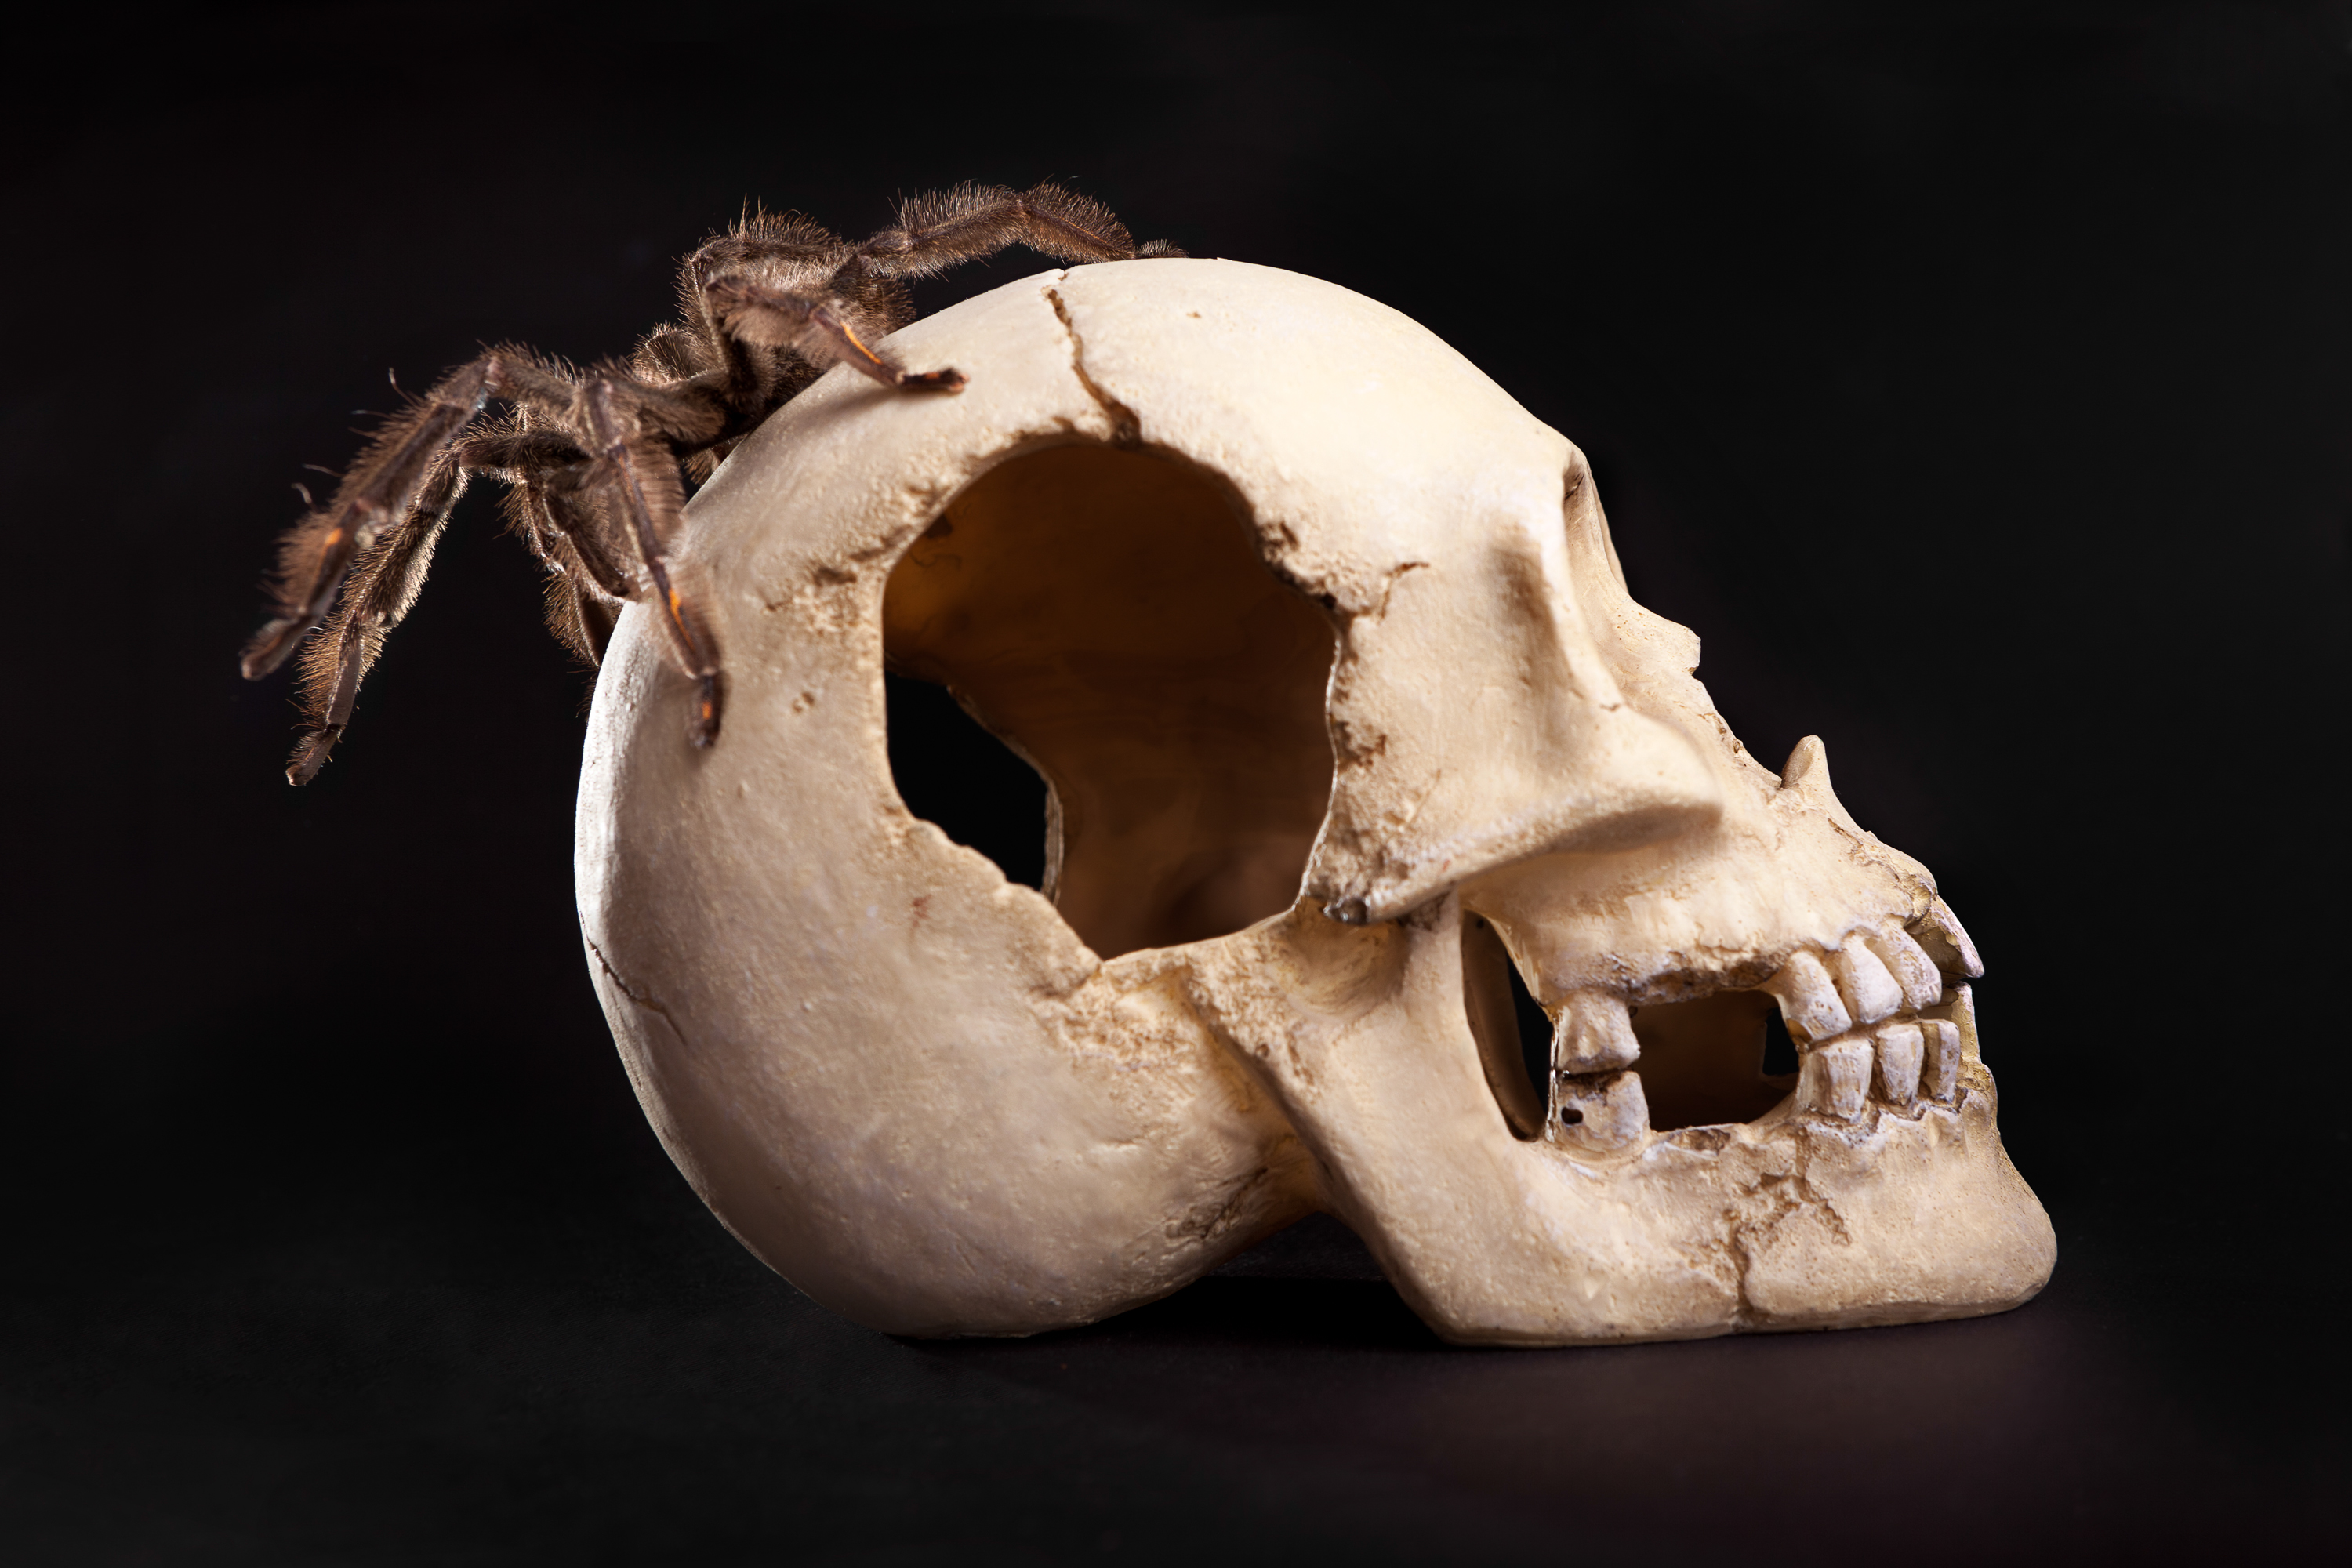 Spider on Human Skull, Anatomy, Scary, Model, Nature, HQ Photo